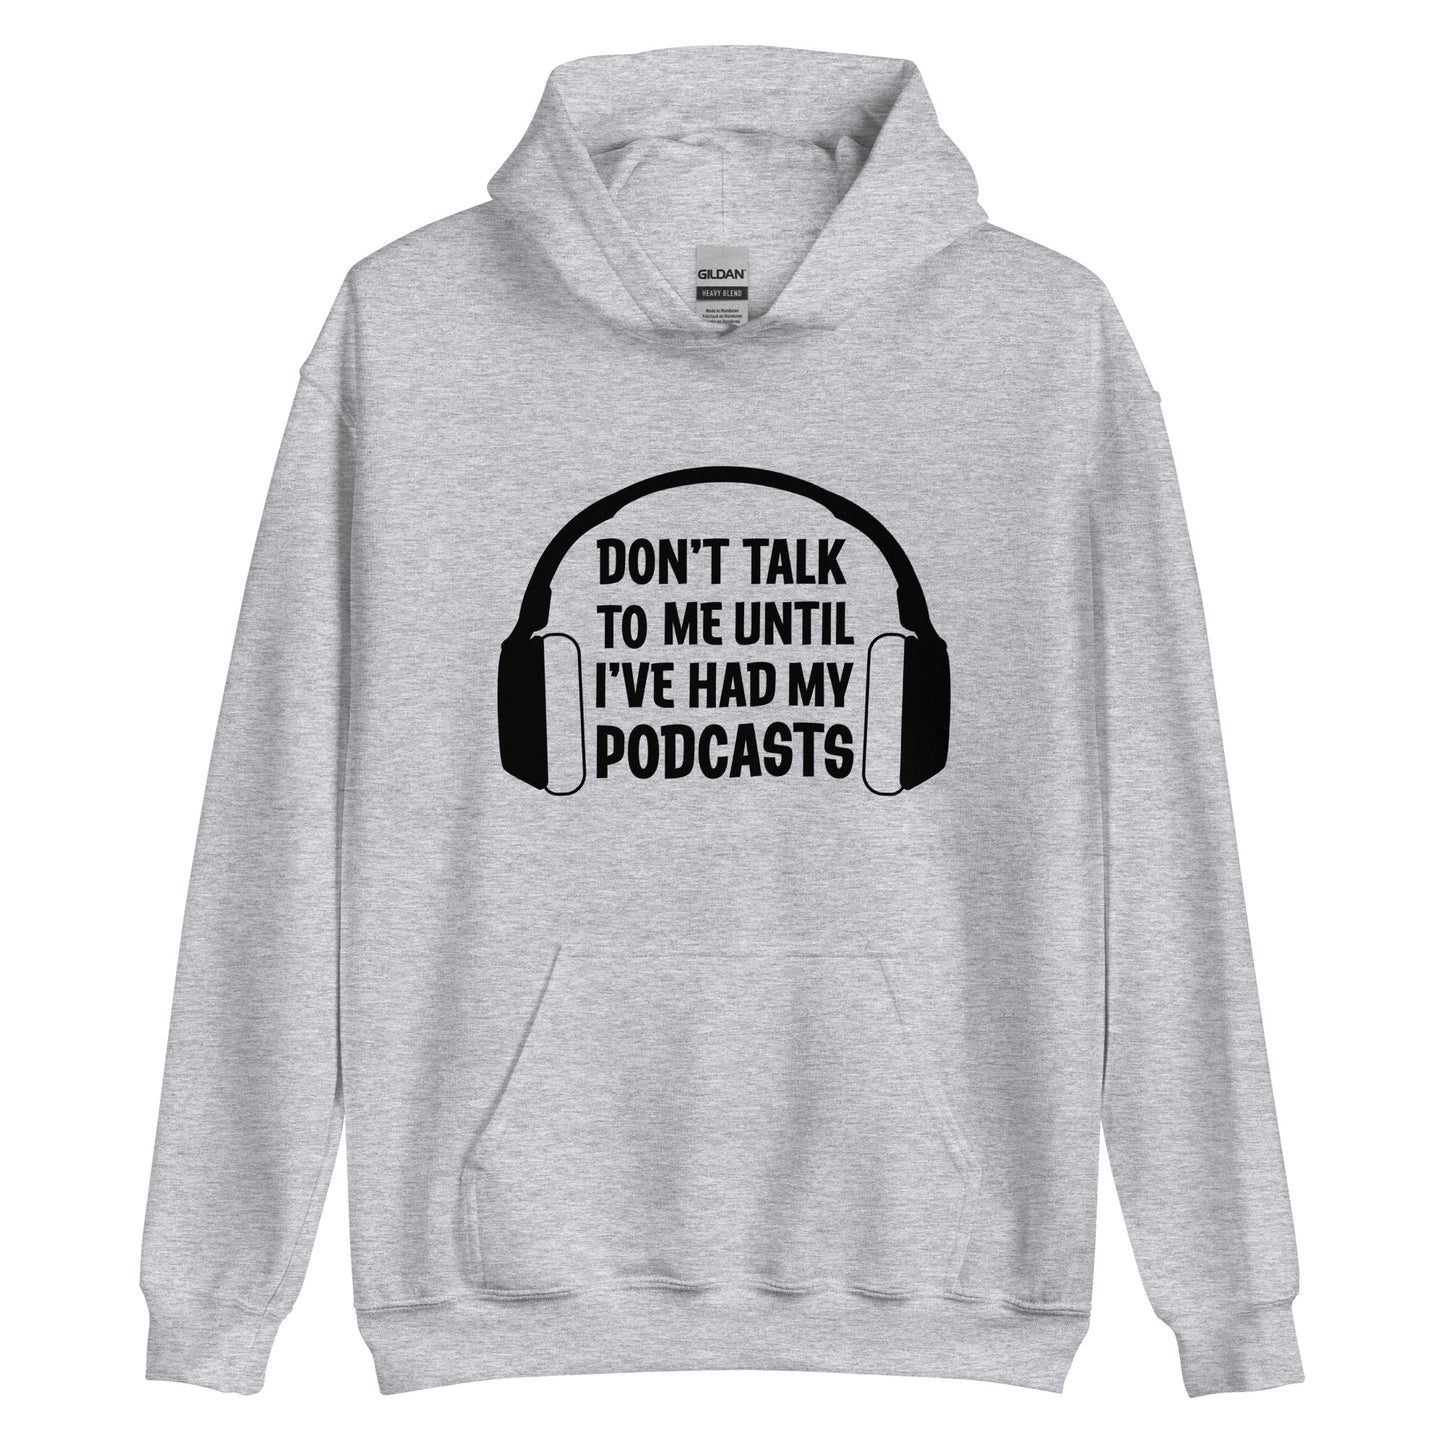 A grey hooded sweatshirt with a picture of headphones and text reading "Don't talk to me until I've had my podcasts"